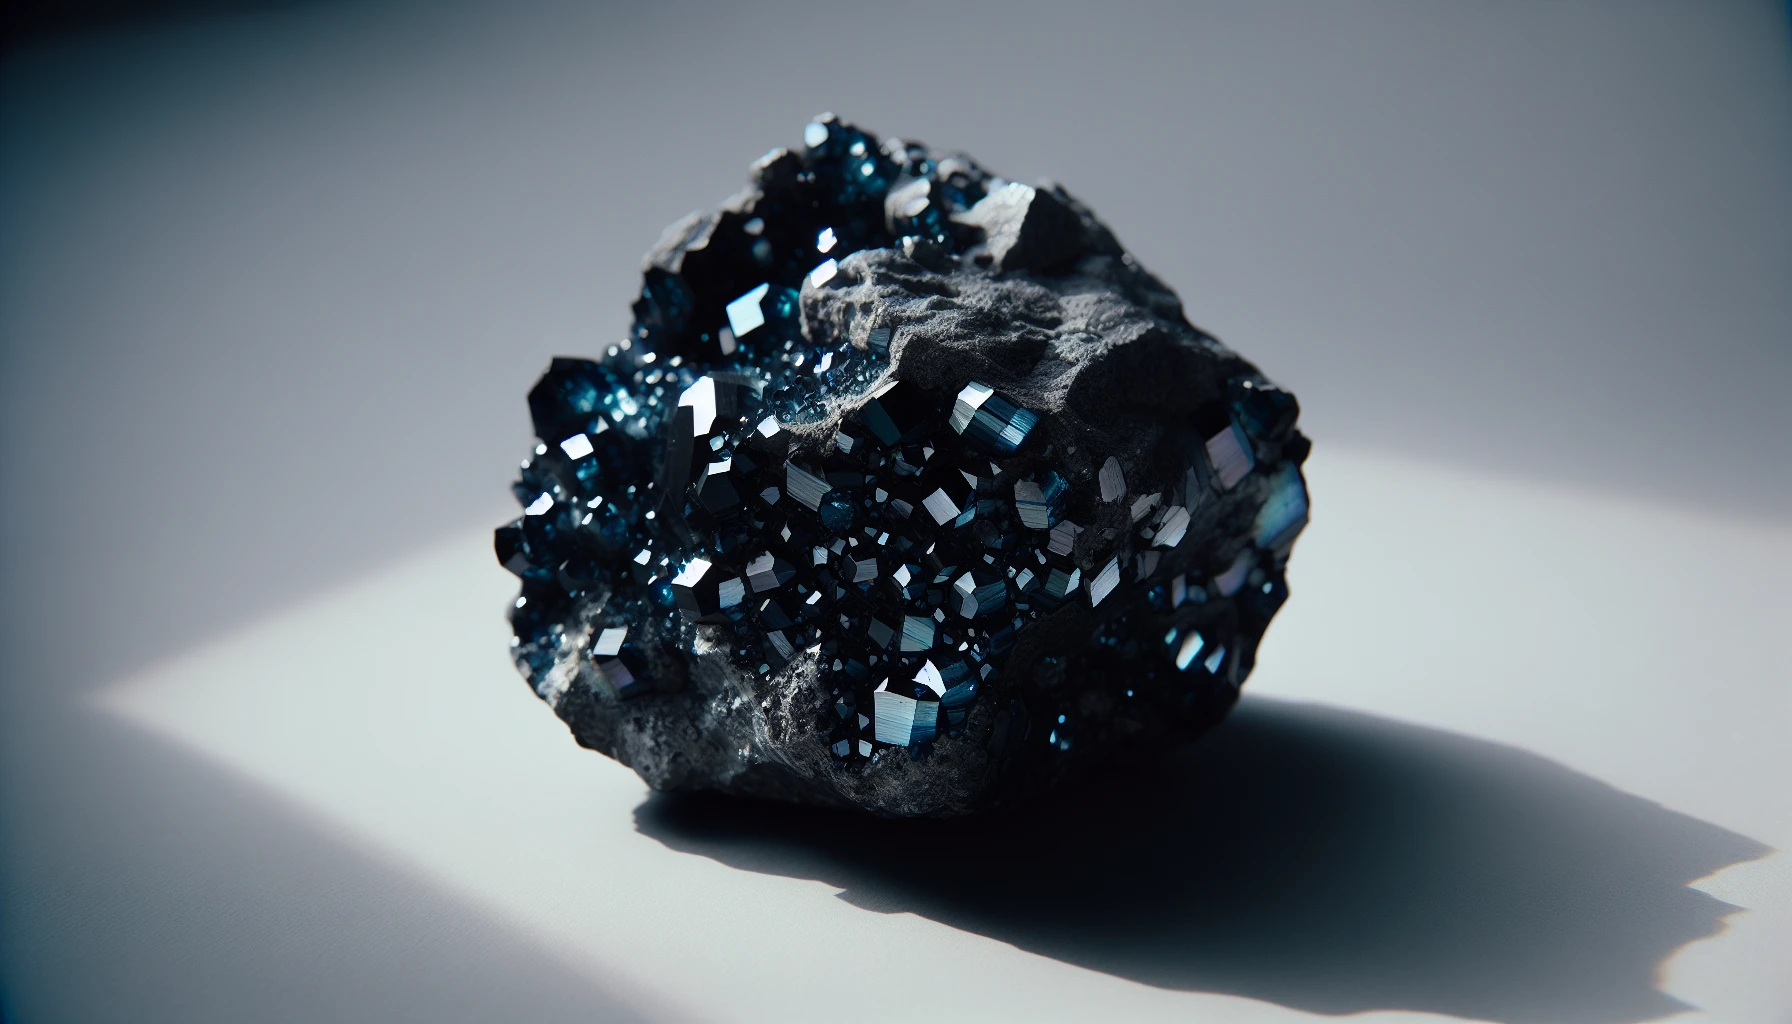 Larvikite, also known as Norwegian Blue Pearl, a dark gray or black igneous rock with blue and silver shimmering crystals found in Norway